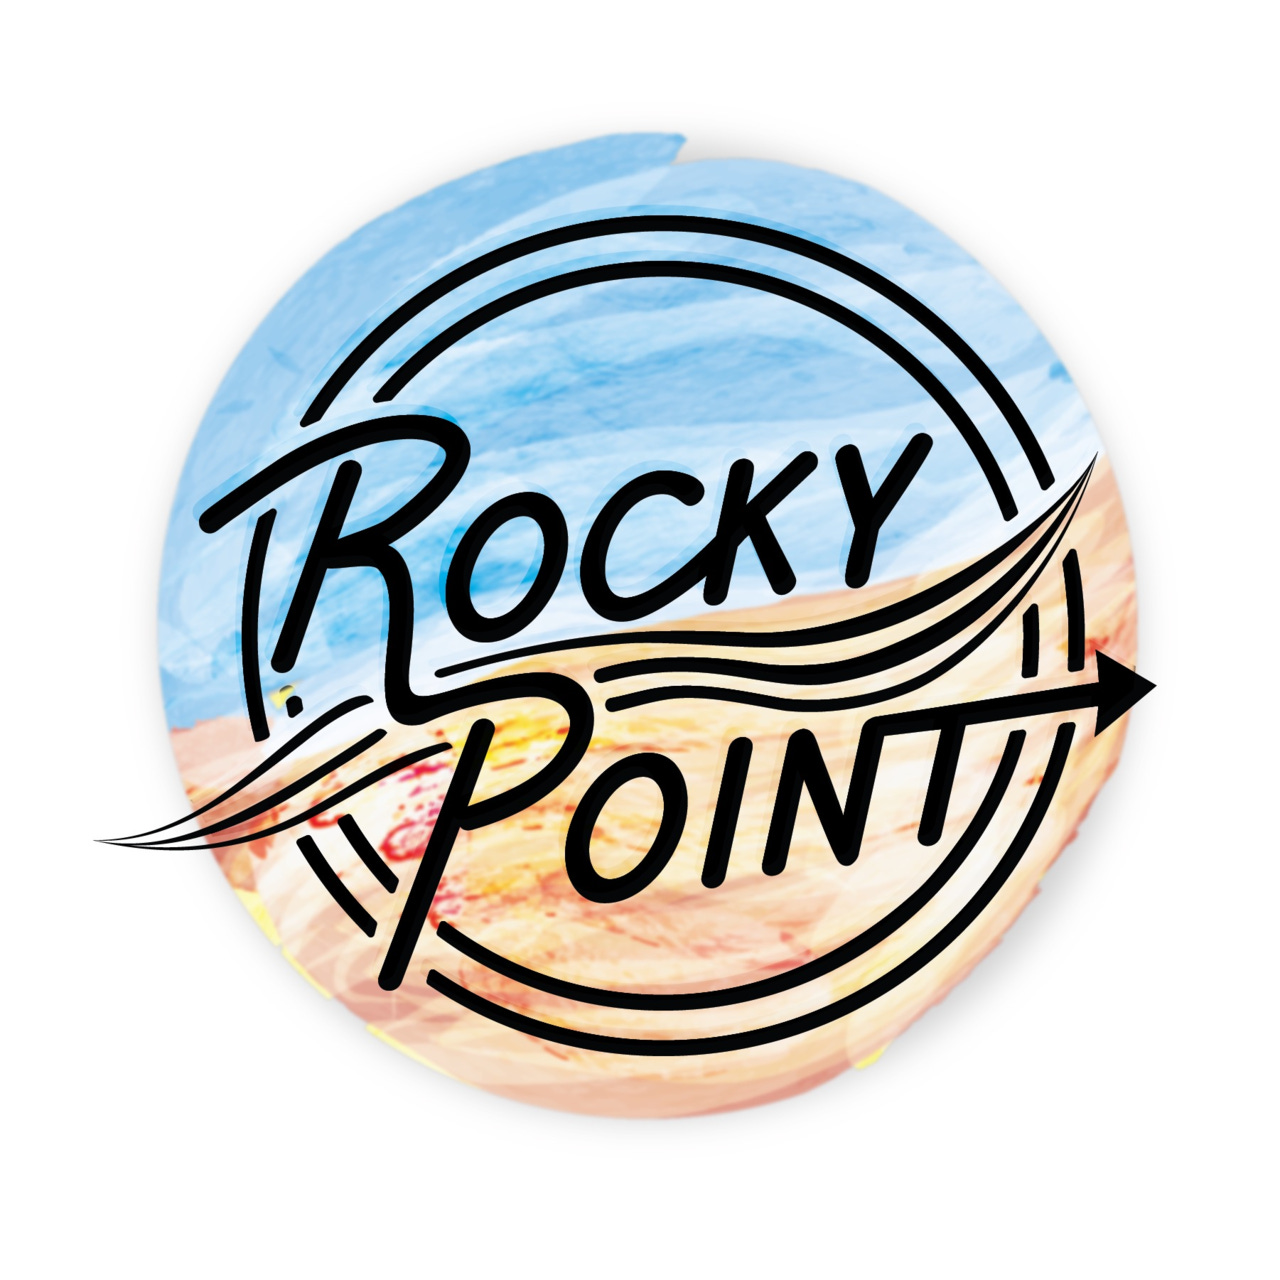 Artwork for Rocky Point